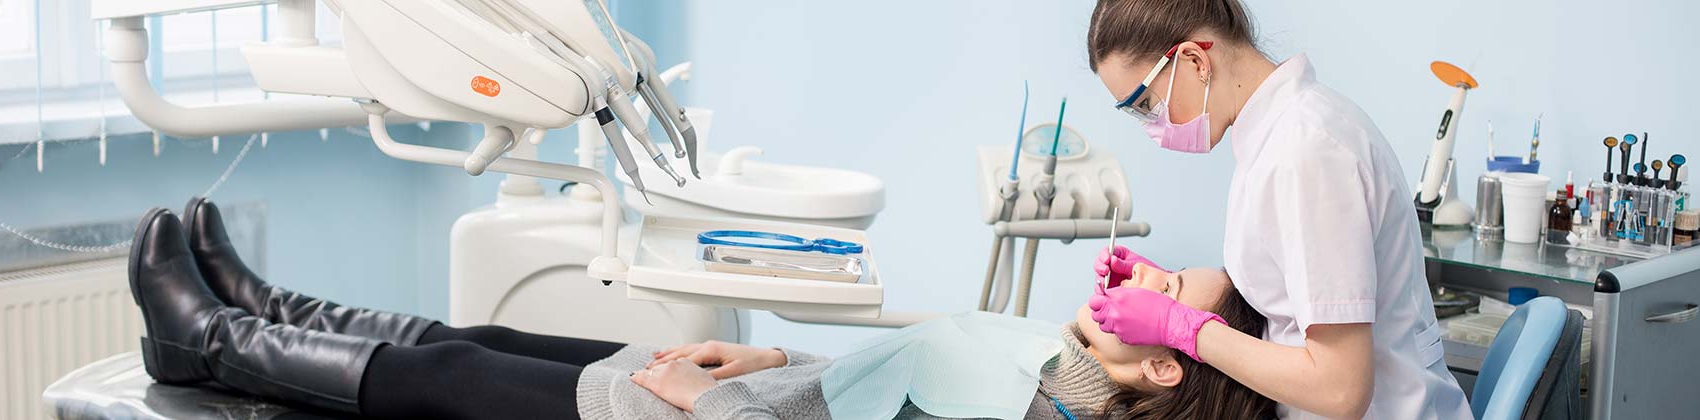 Certified dental assistants are in high demand